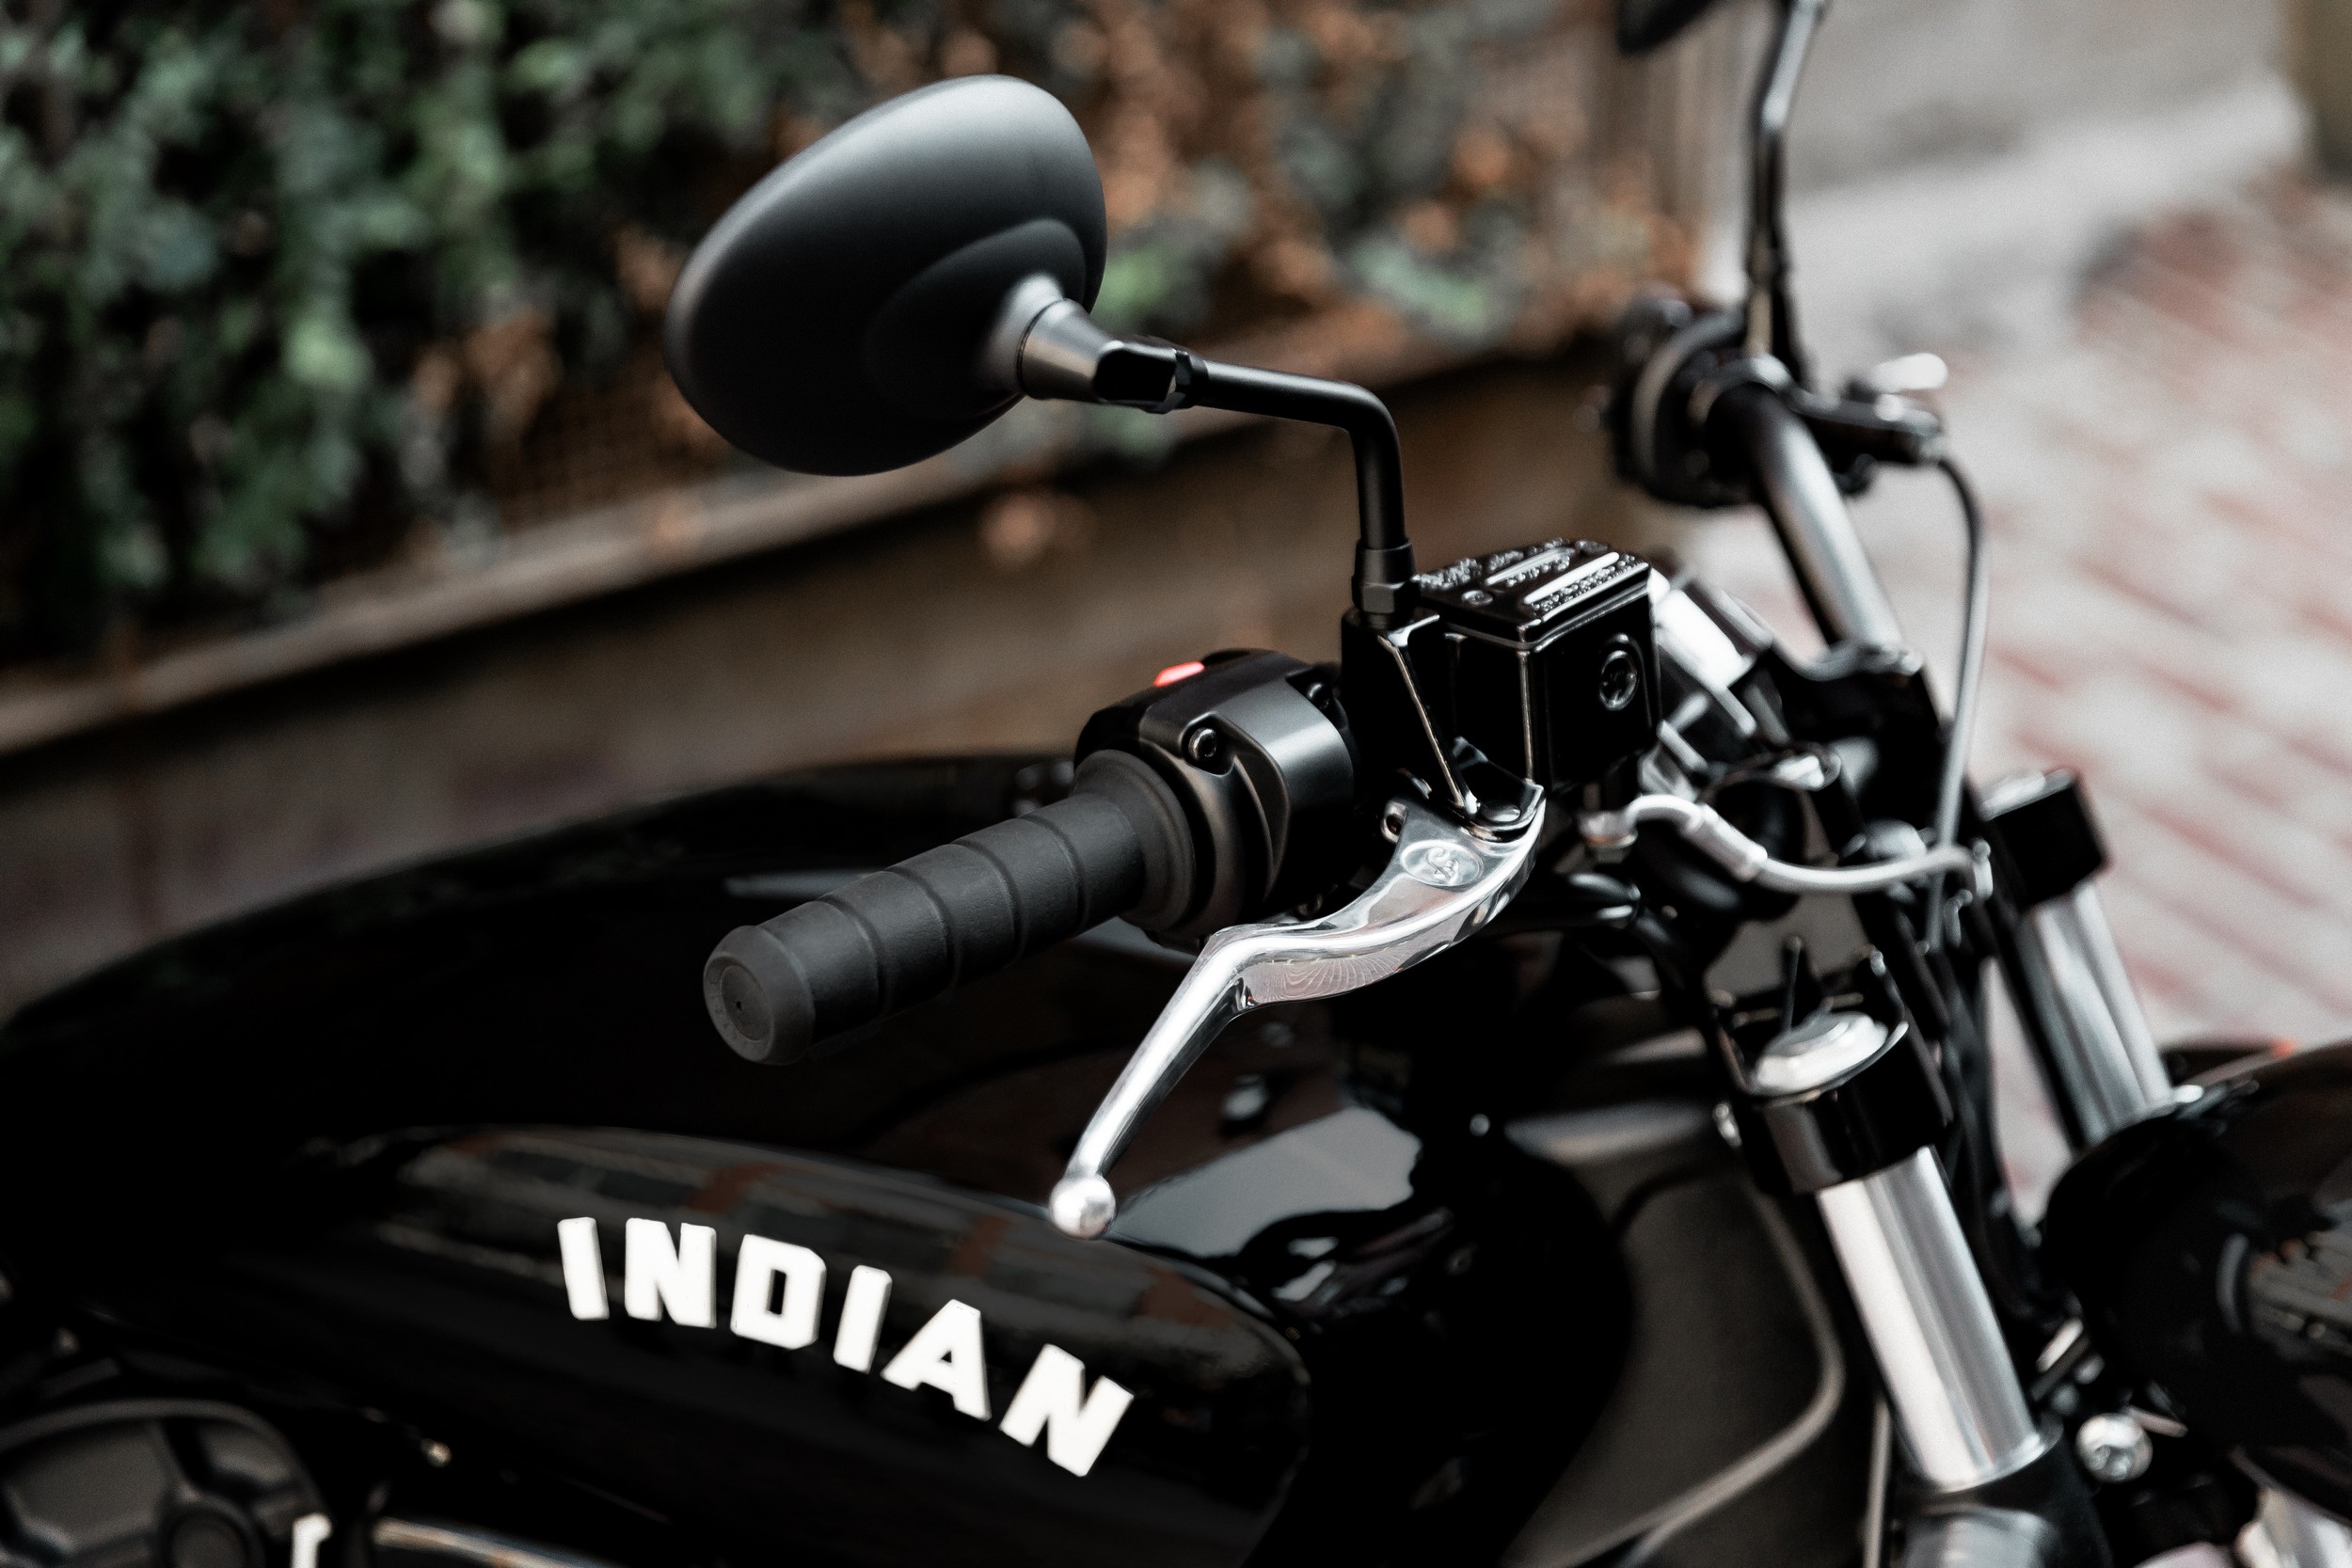 Indian_Scout_Bobber_Sixty_2020